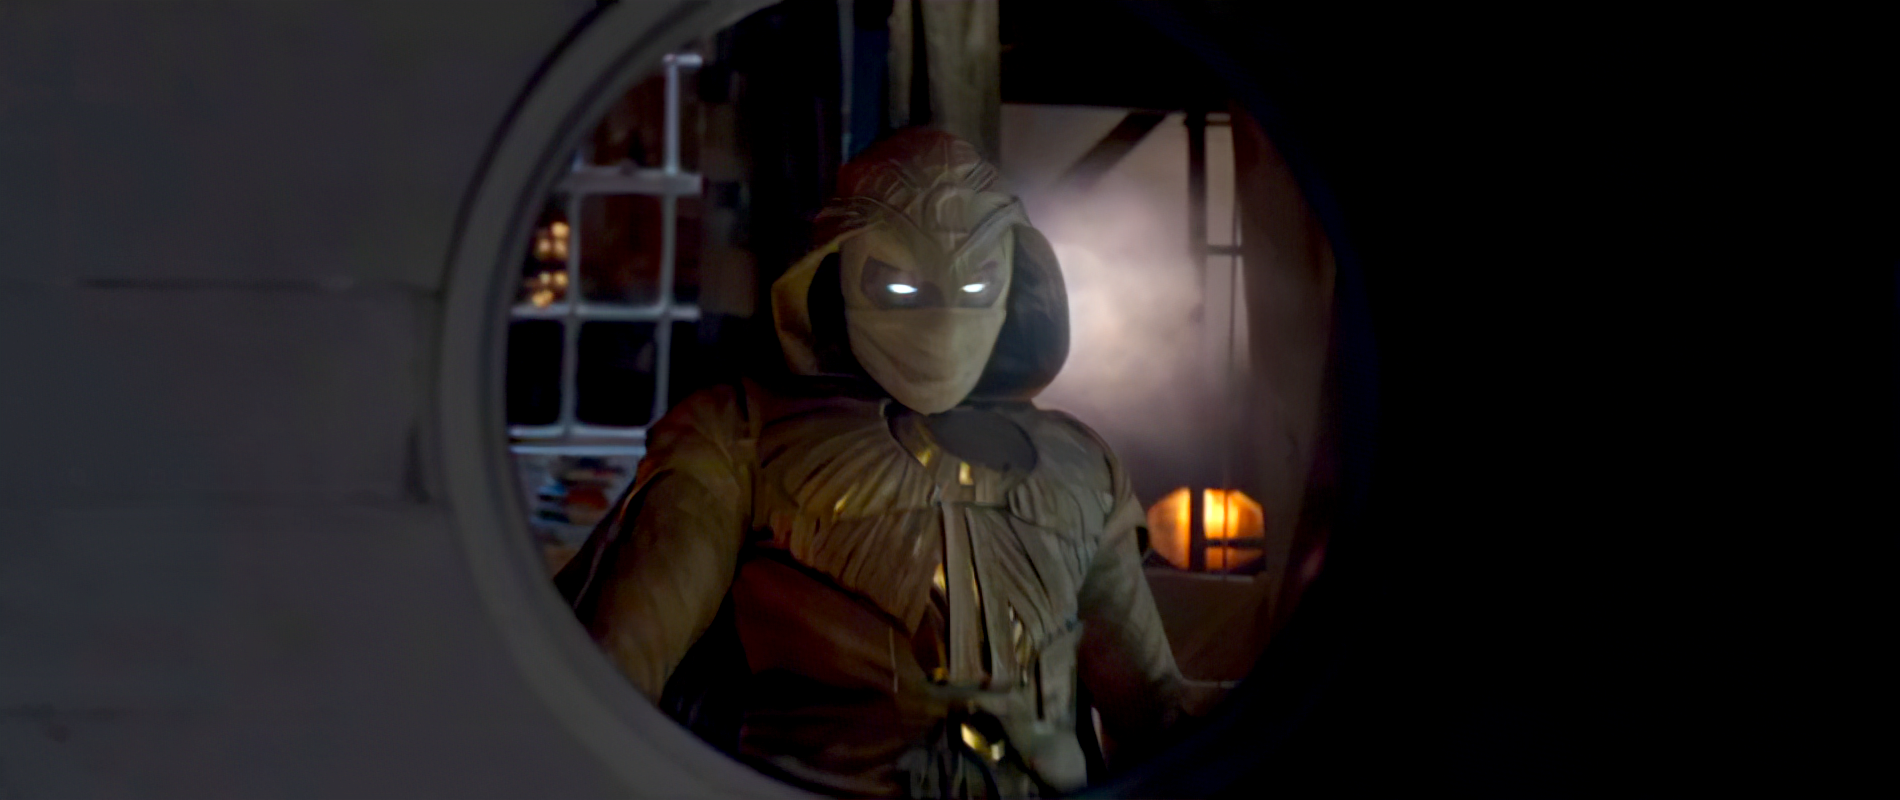 First look at Moon Knight in the official trailer.